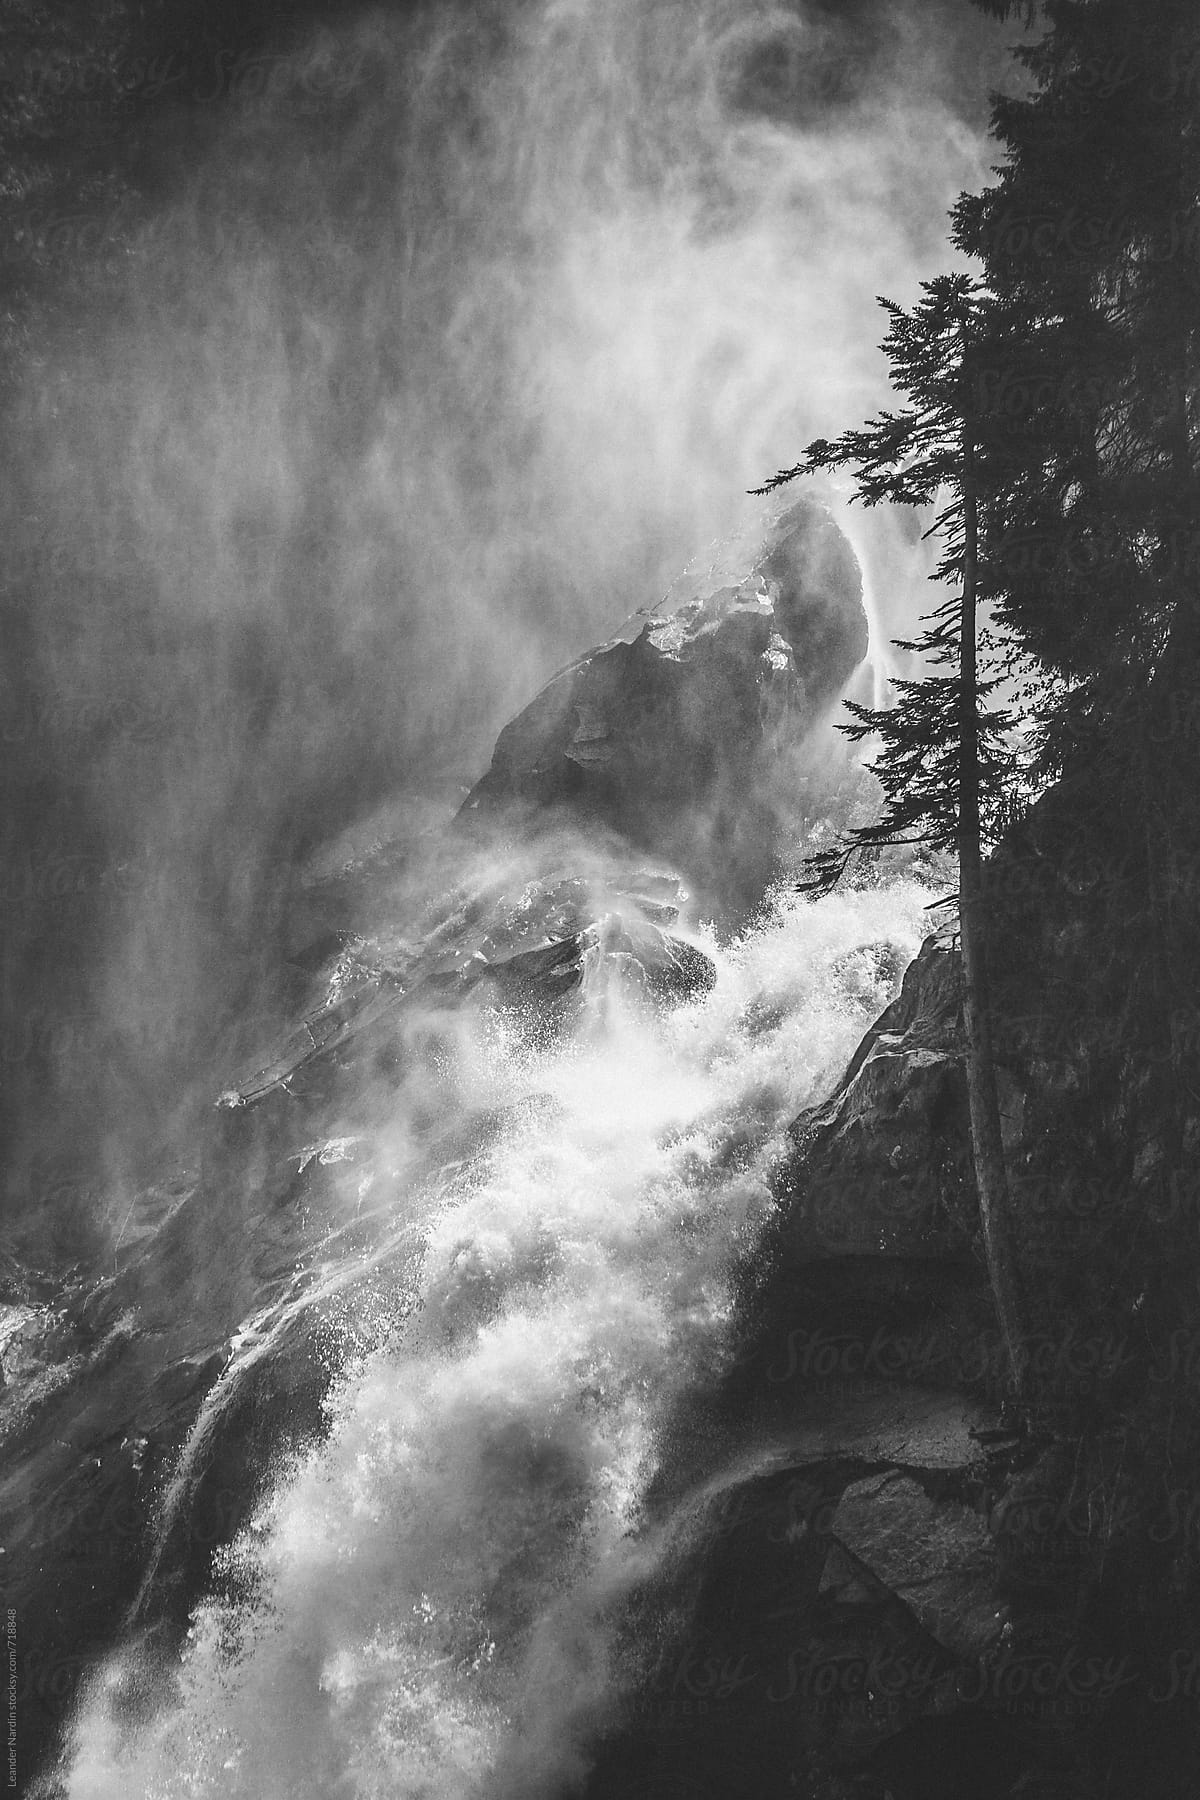 detail of a powerful river flowing down a mountain - black and white